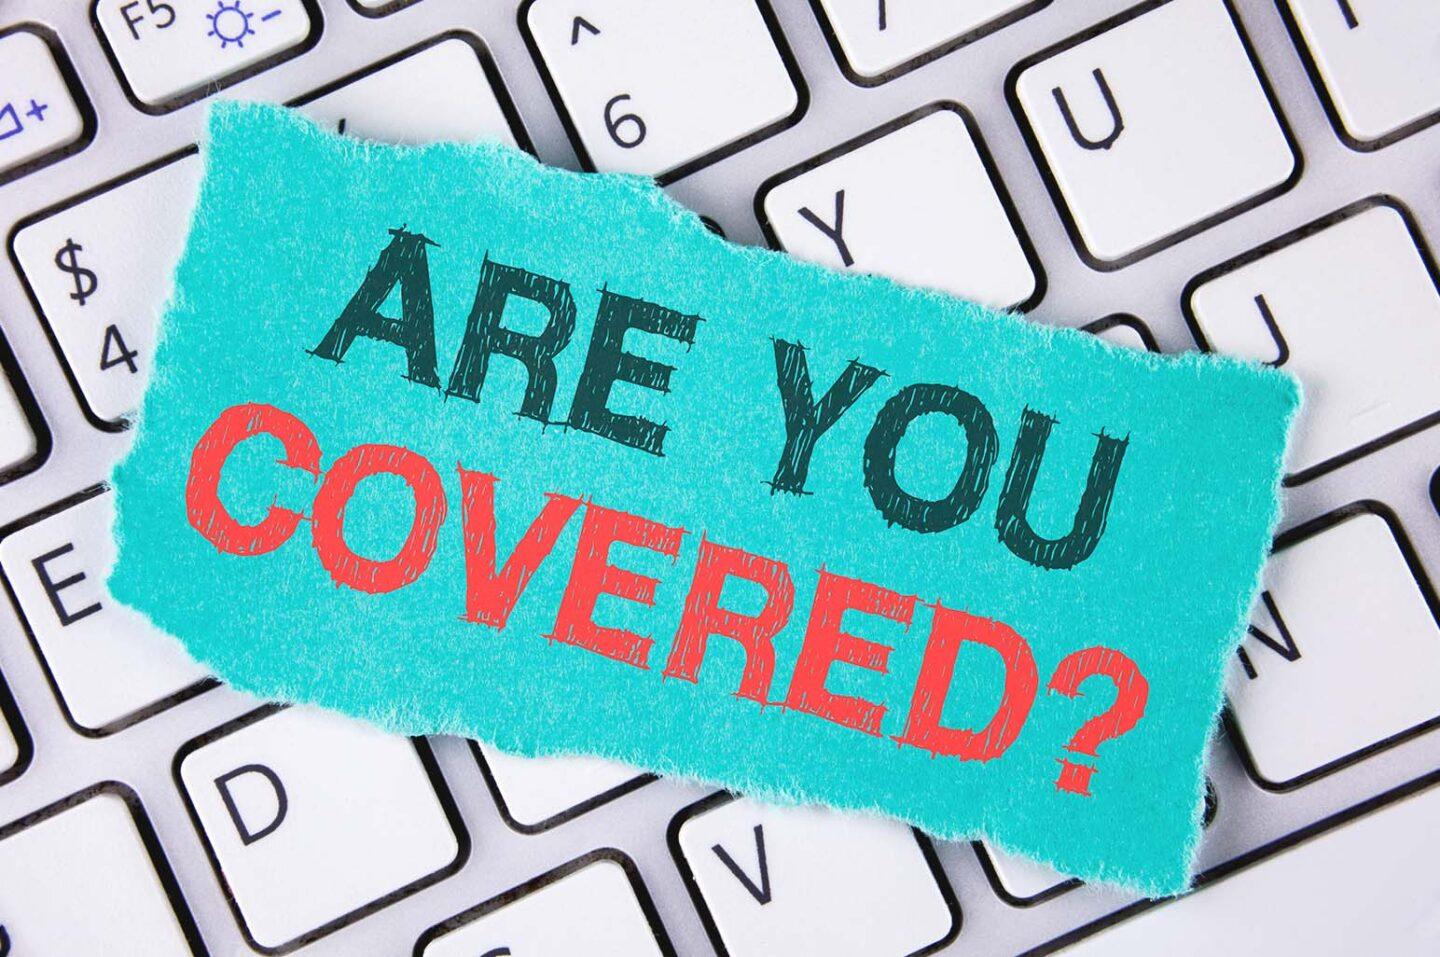 Insurance Plans - Are You Covered?